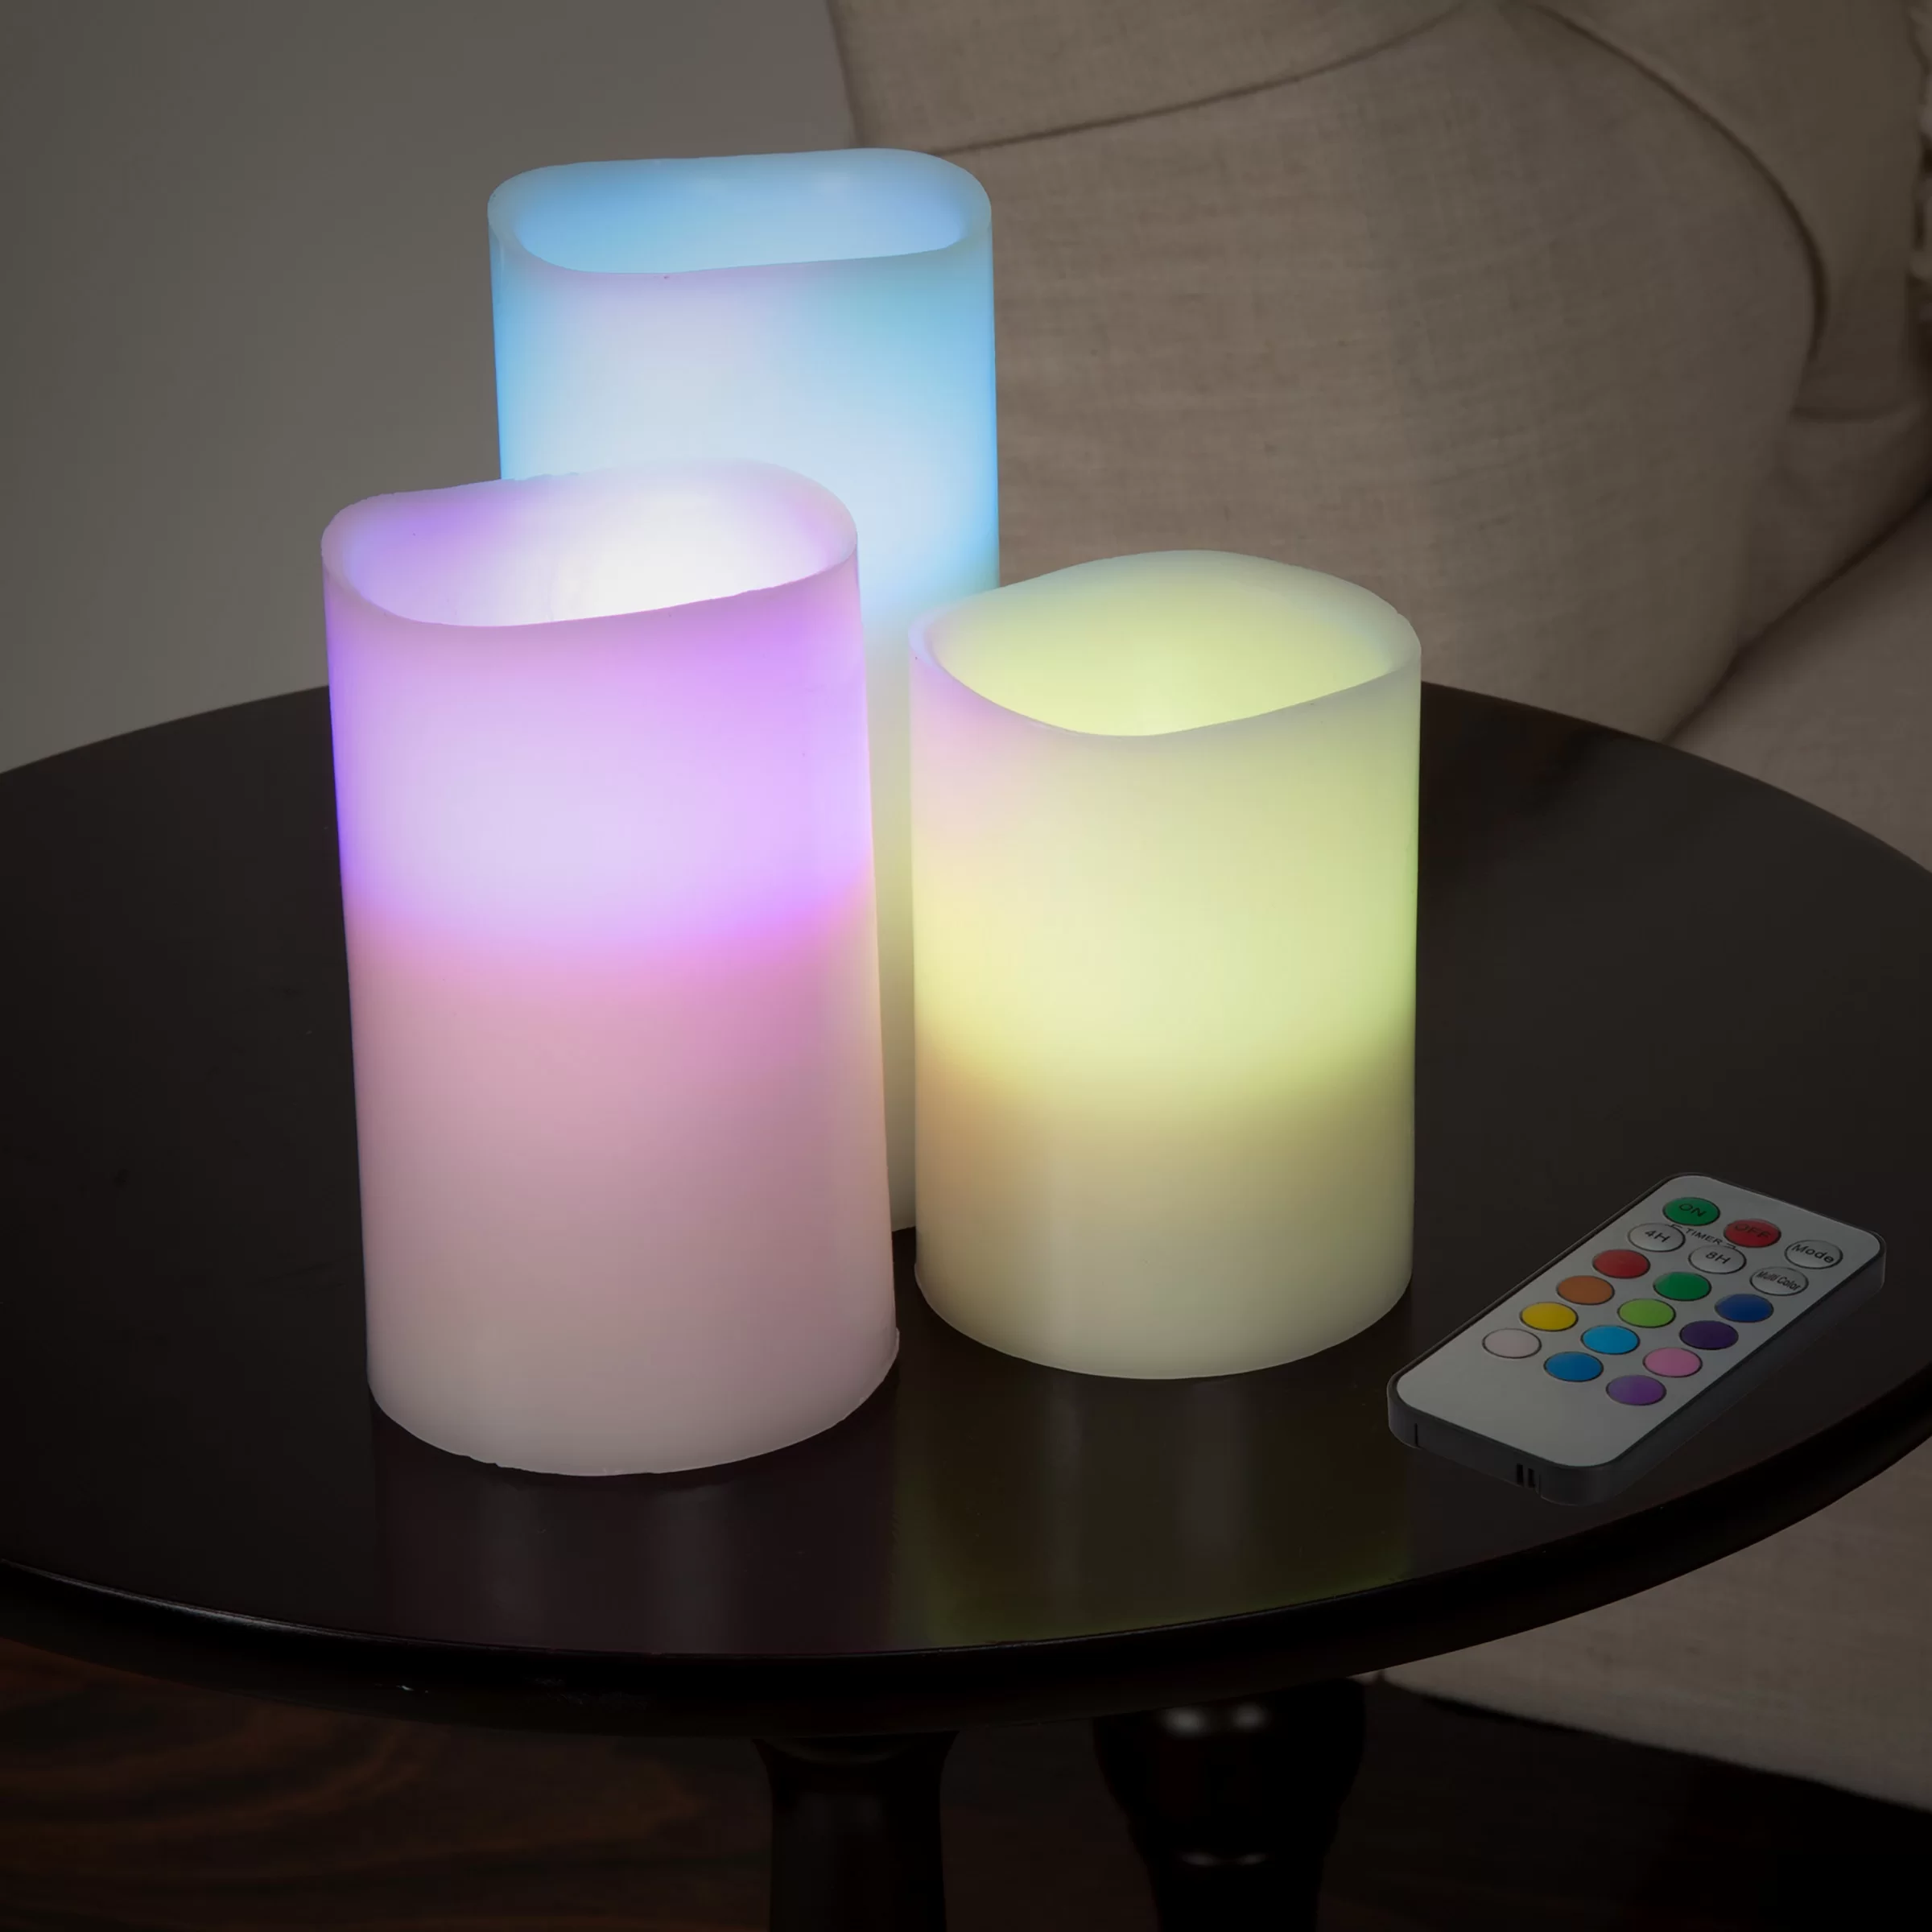 Three color-changing flameless candles in purple, yellow, and blue on top of black side table next to small silver remote